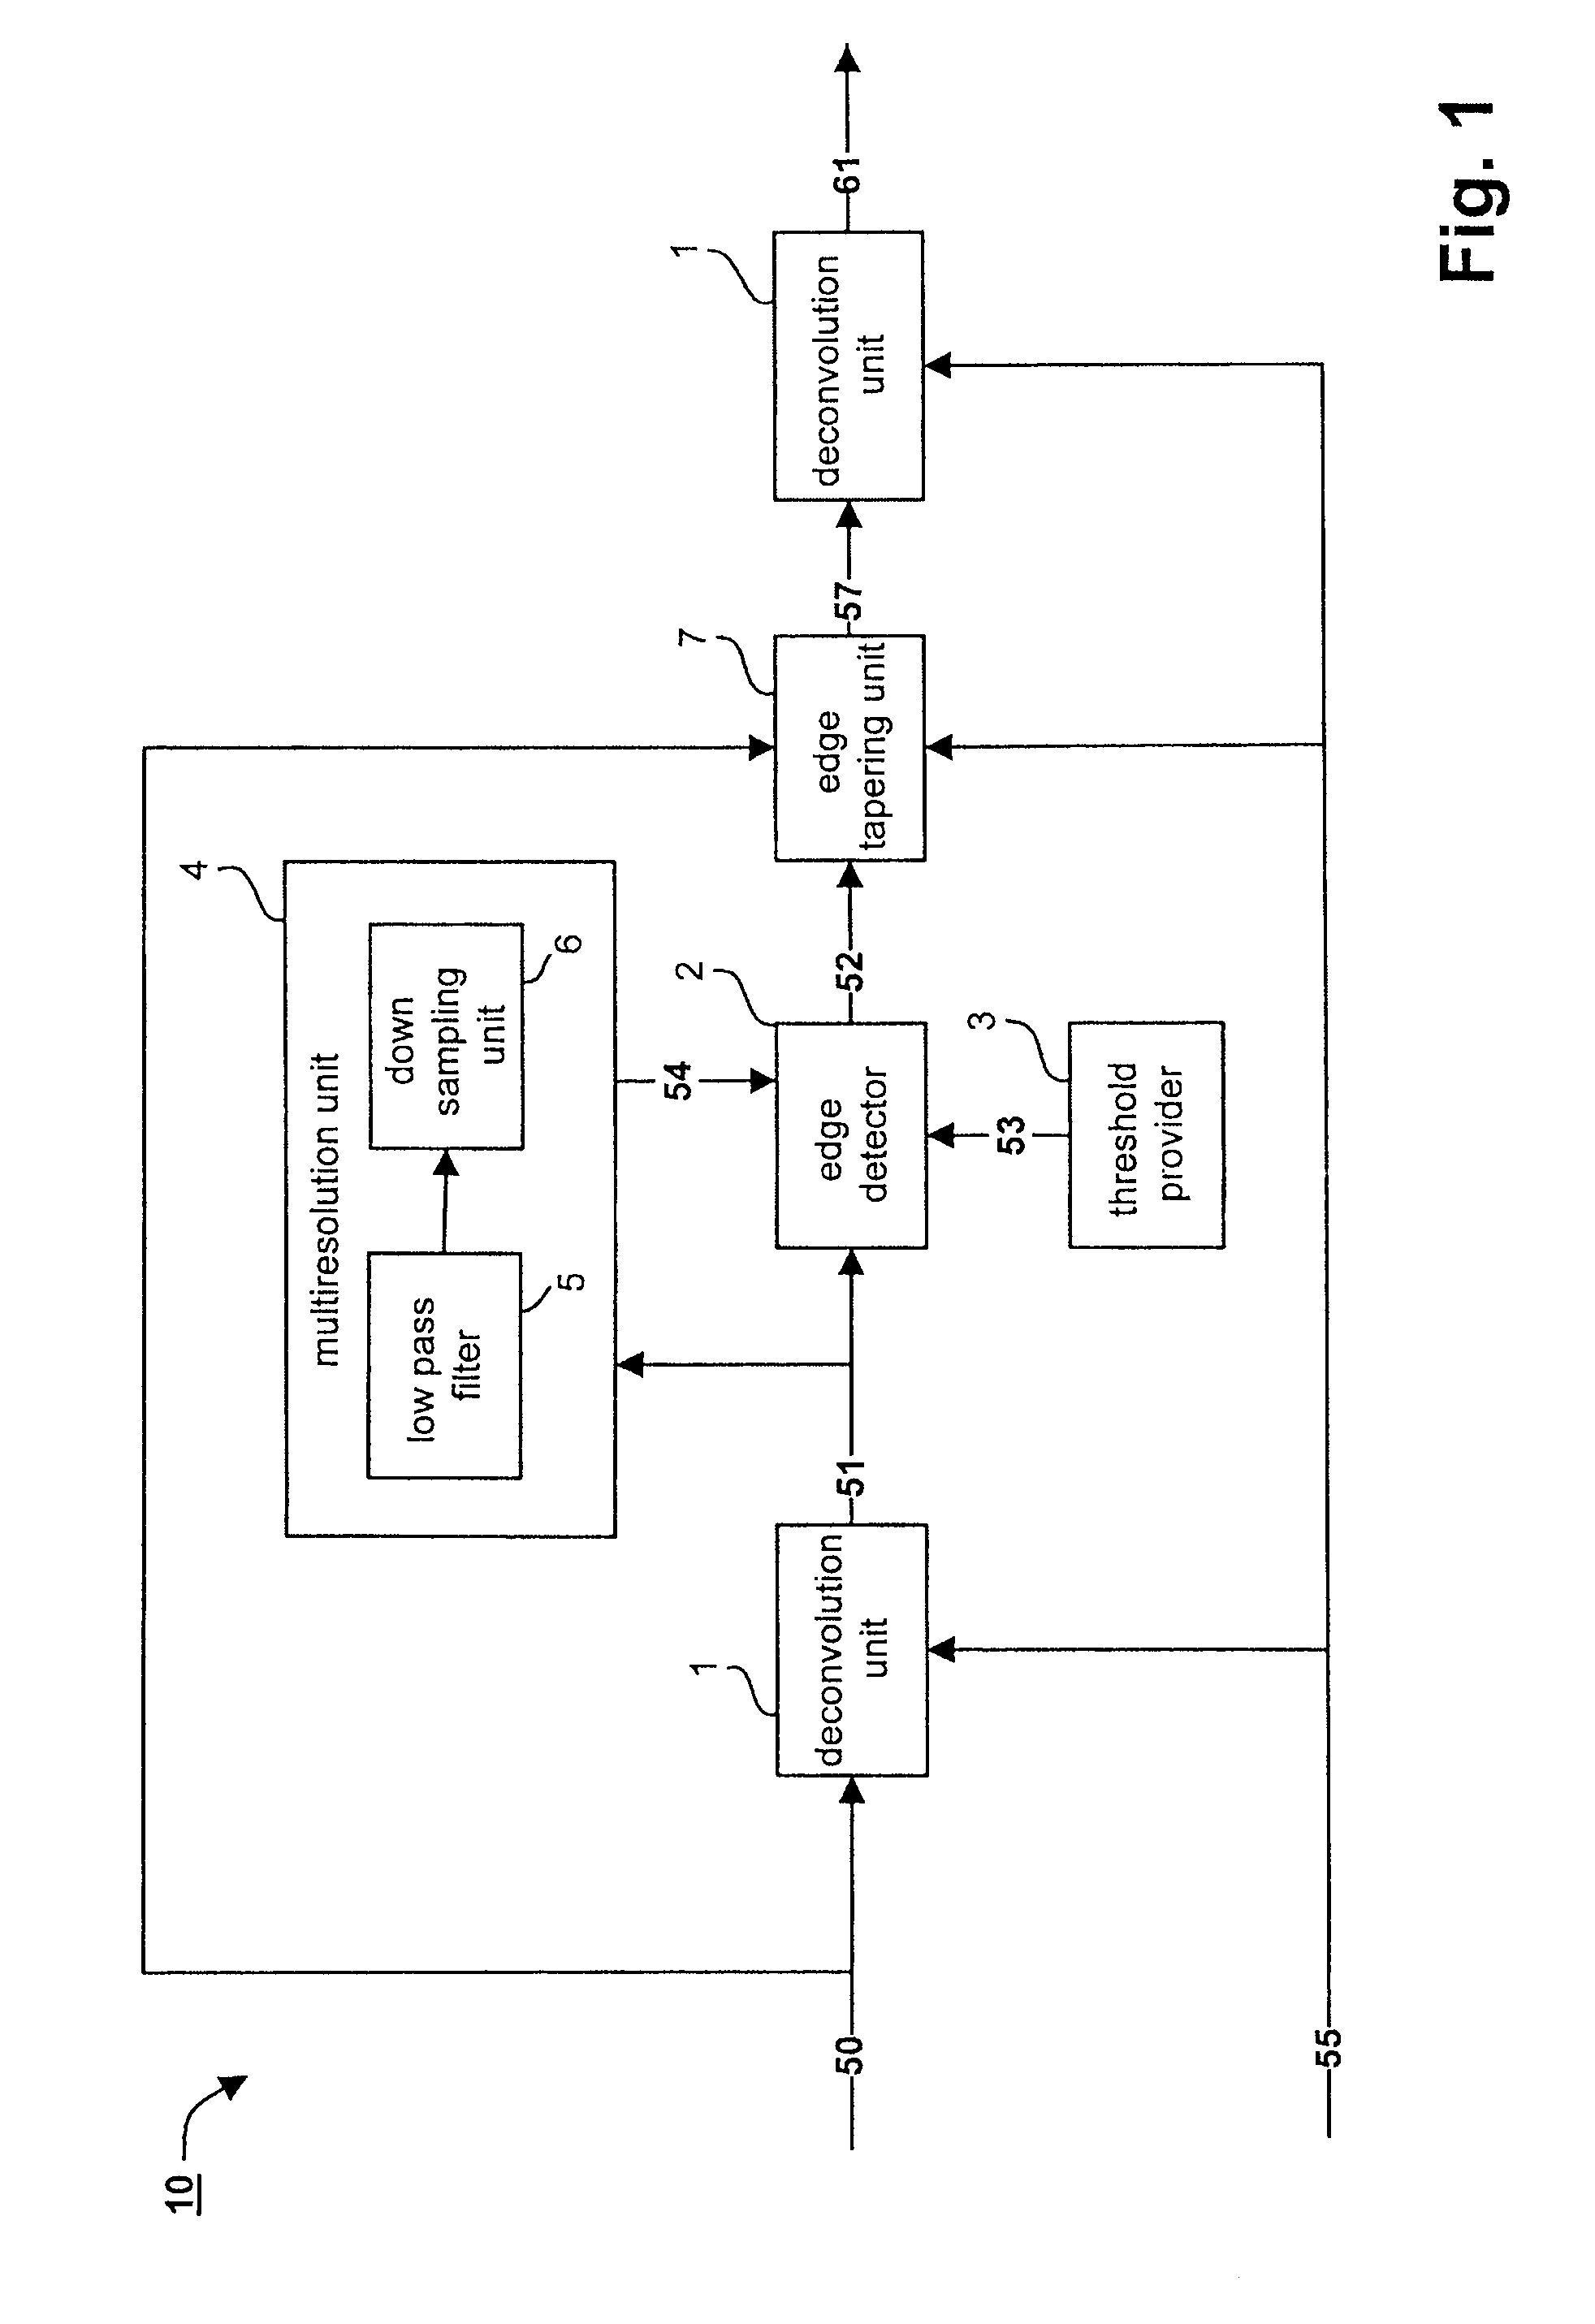 Method and system for reducing ringing artifacts of image deconvolution